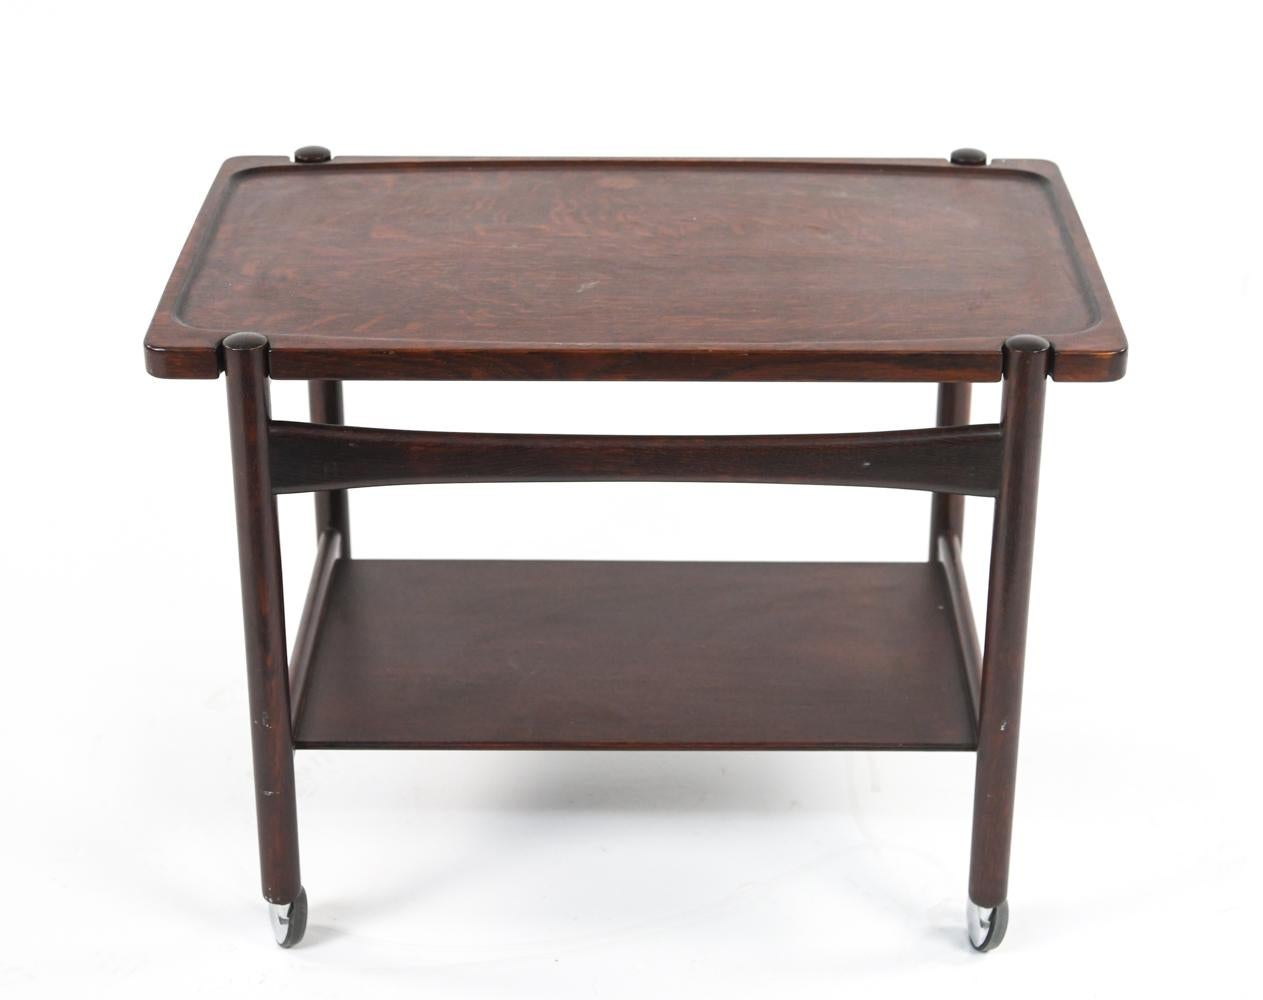 Impressive Danish mid-century bar cart or tea trolley with removable tray top on rolling base. Designed by Hans J. Wegner for Andreas Tuck. In richly stained oak with warm red tone reminiscent of rosewood. Stamped underneath with Andreas Tuck